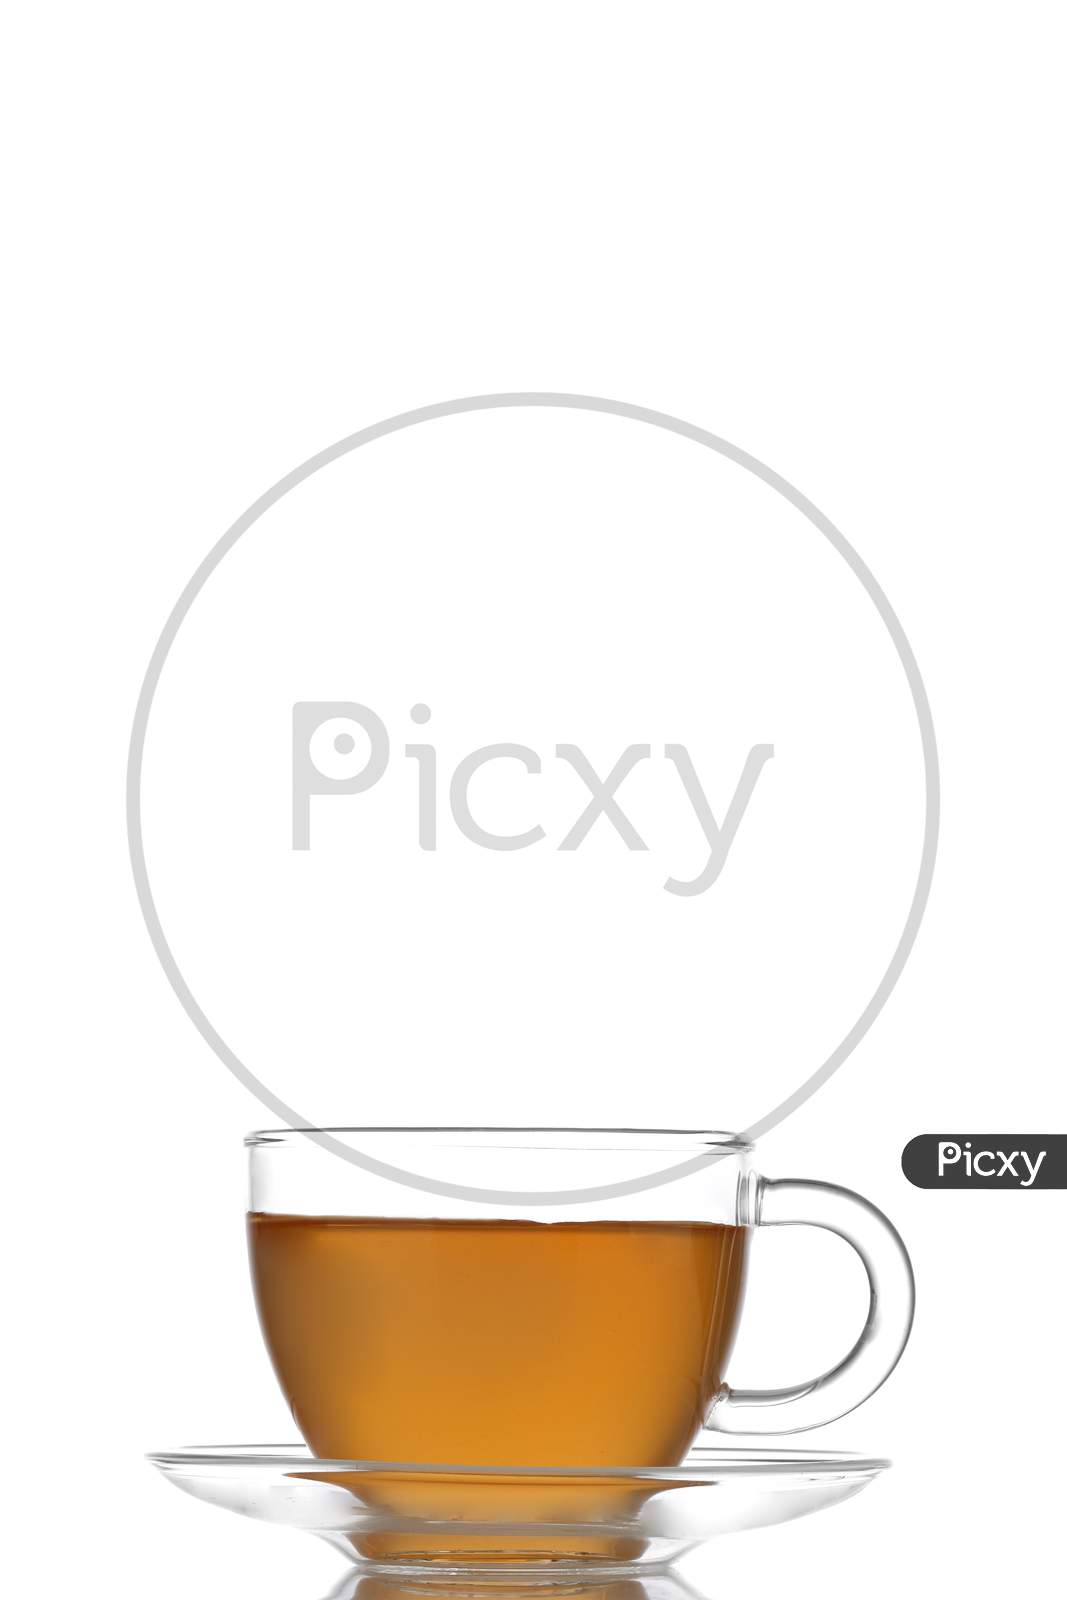 Cup Of Tea On White Background.Copy Space For The Ads